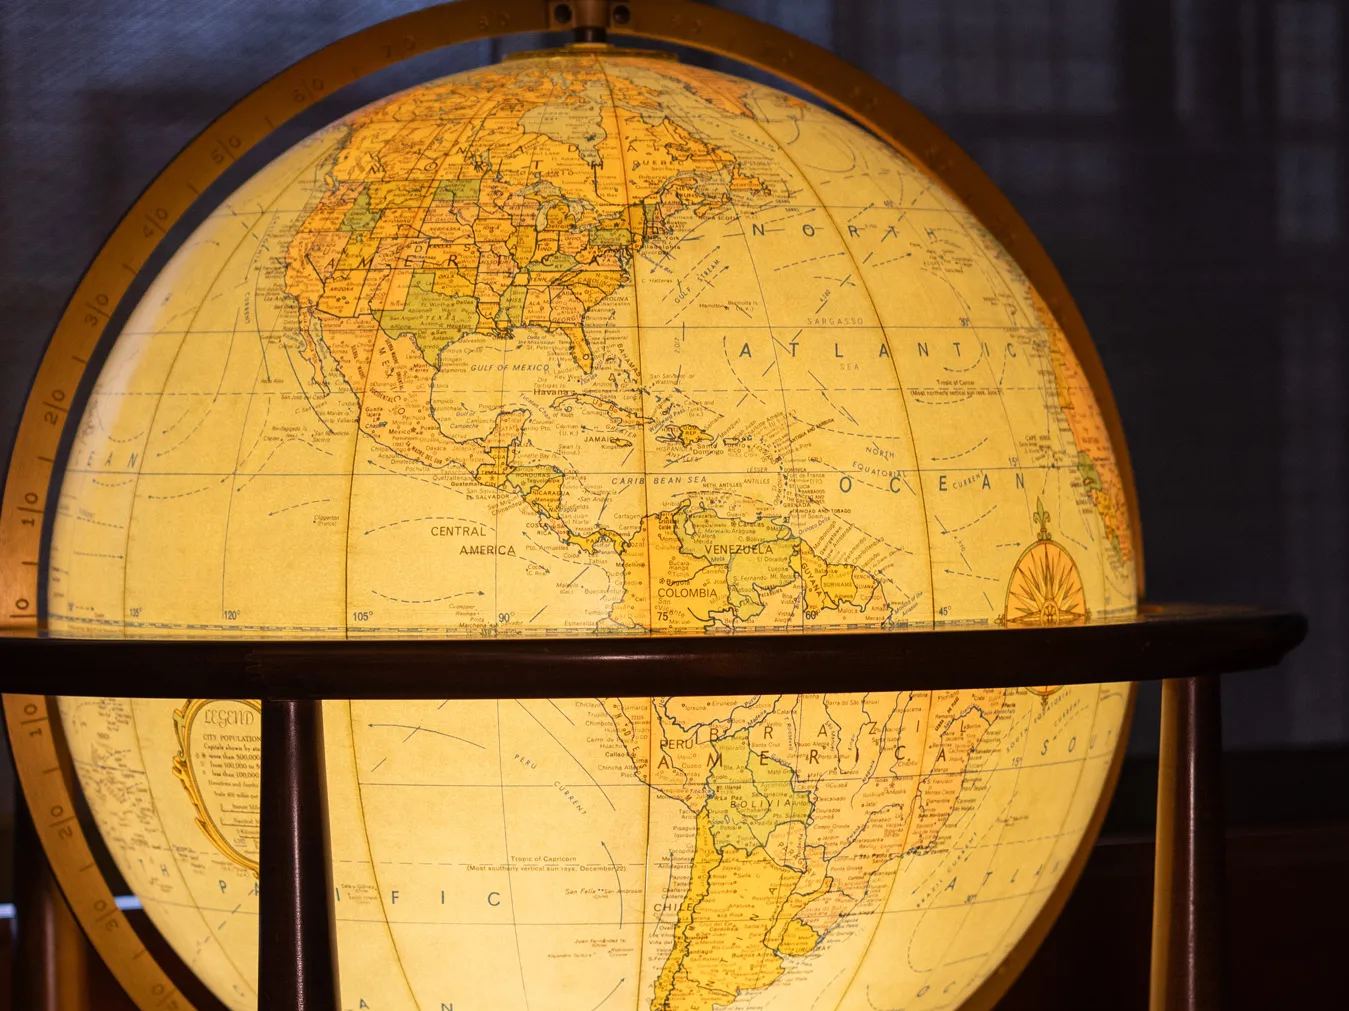 A lighted-up globe, positioned to show North and South America is held in a simple wooden stand. They background of the photo is dark, so the globe shines brightly.